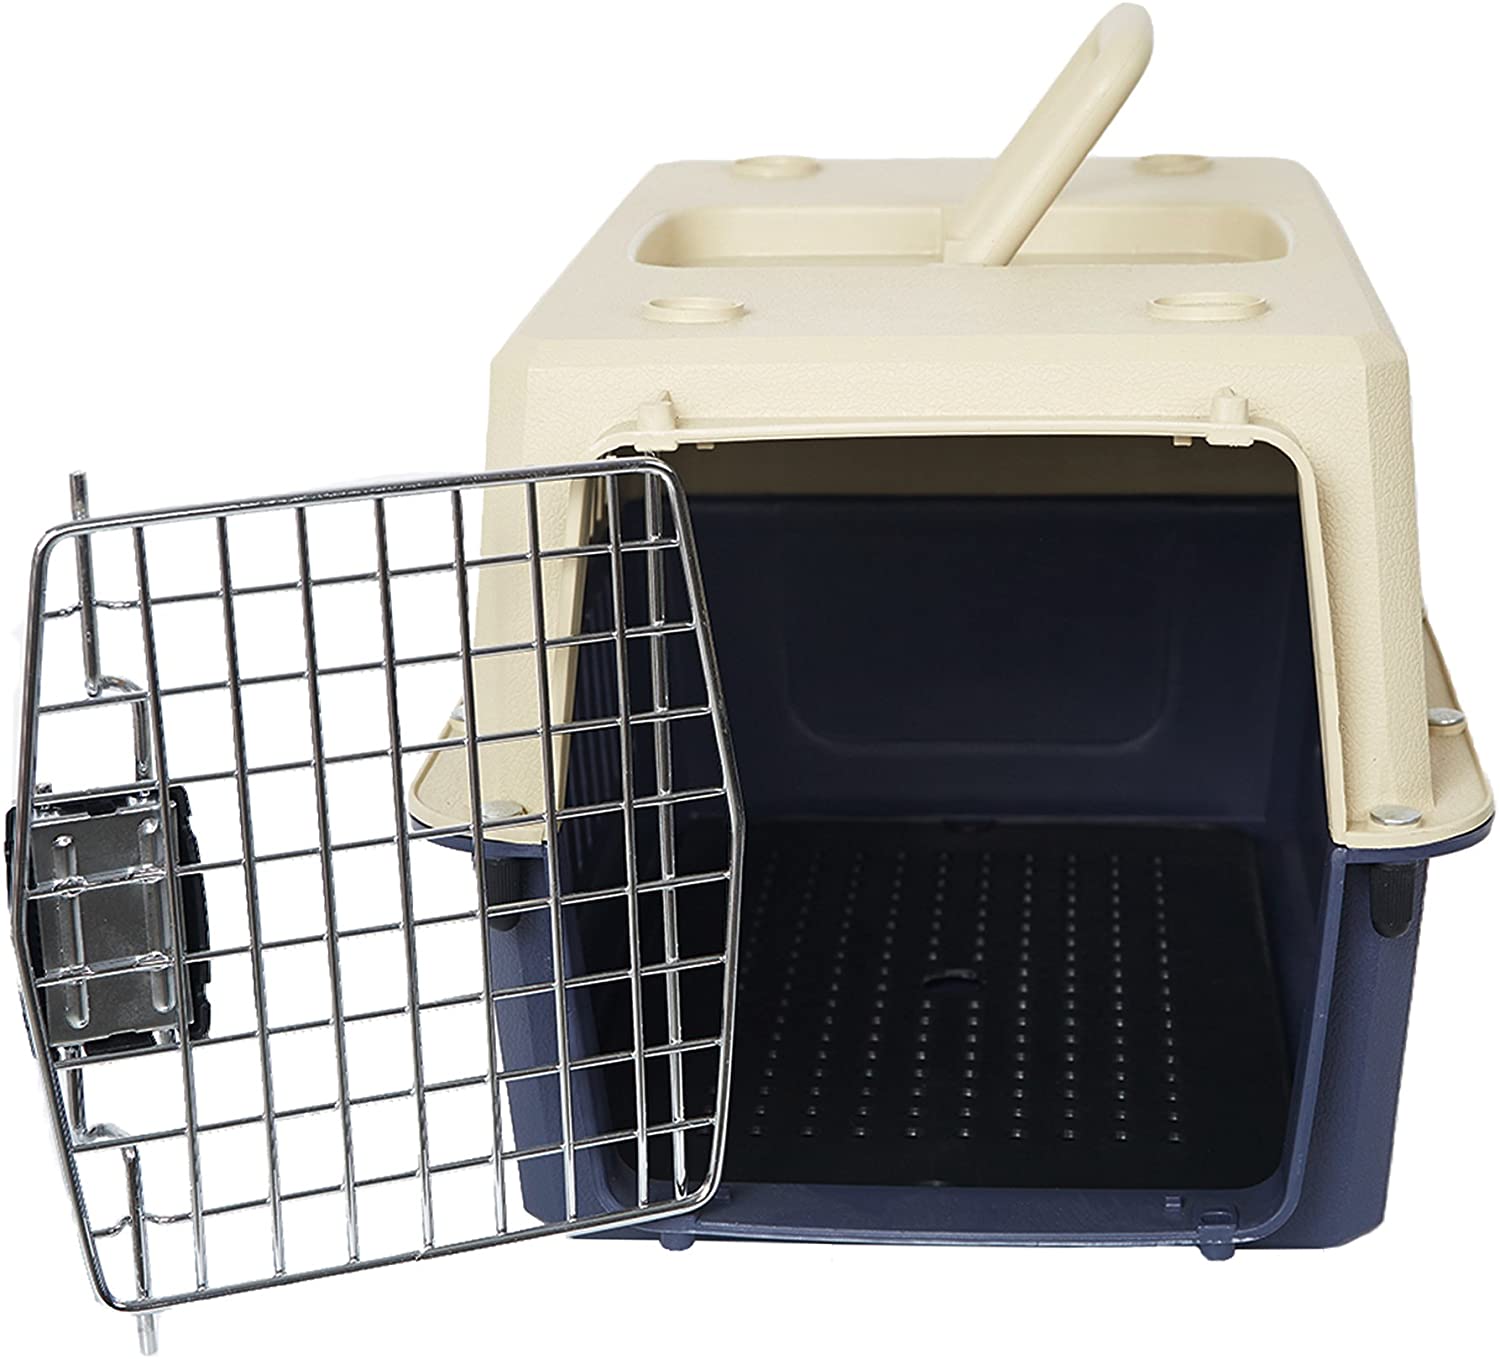 Large Portable Pet Carriers Kennel Crate Airline Approved Kitty Travel